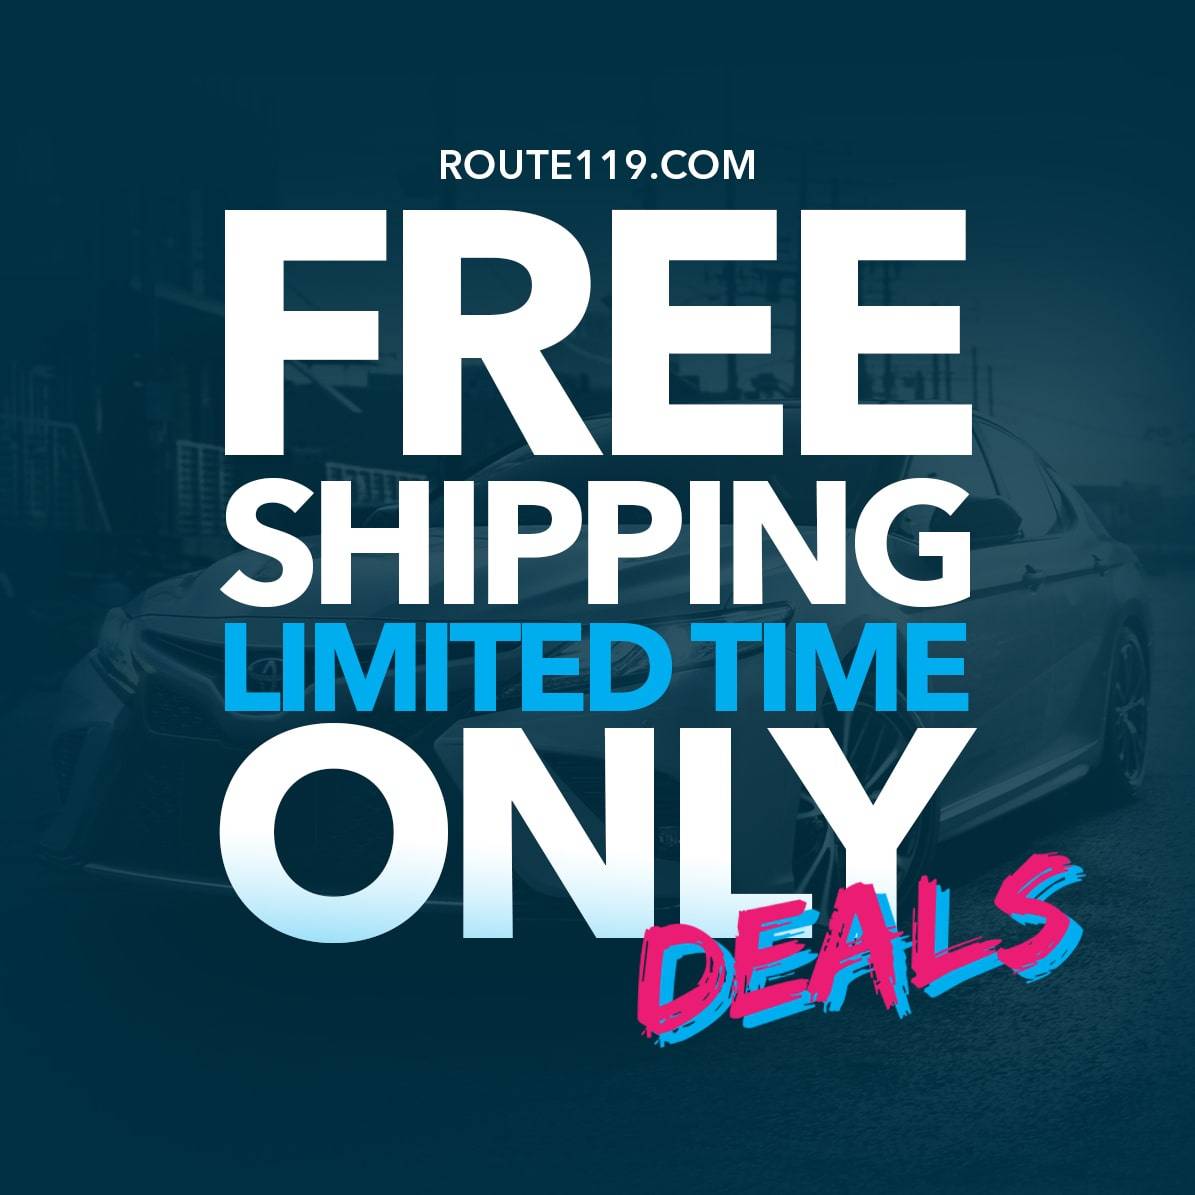 Free Shipping - Limited Time Only!